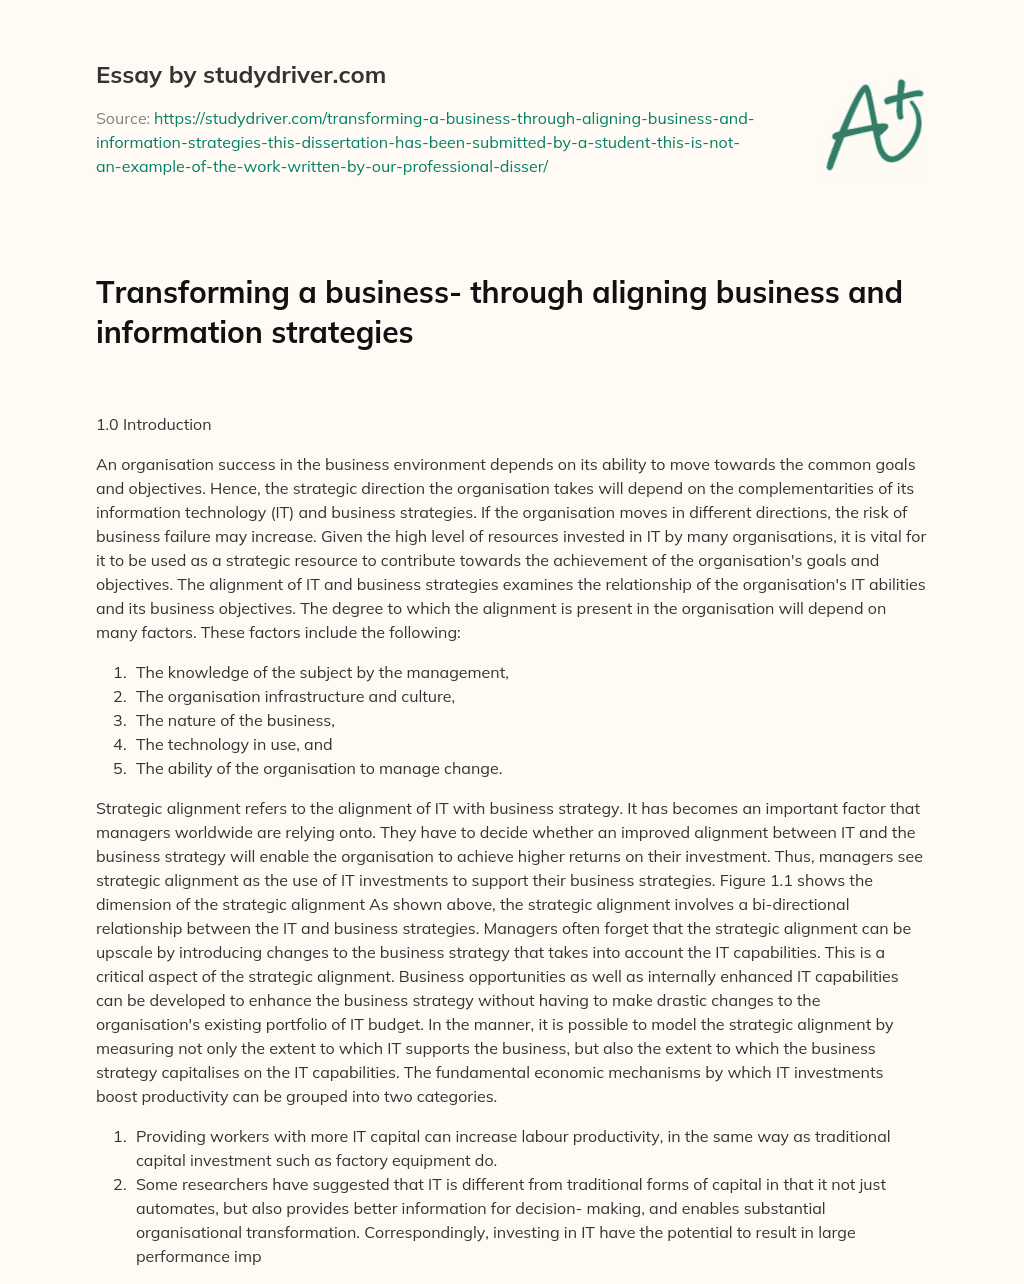 Transforming a Business- through Aligning Business and Information Strategies essay